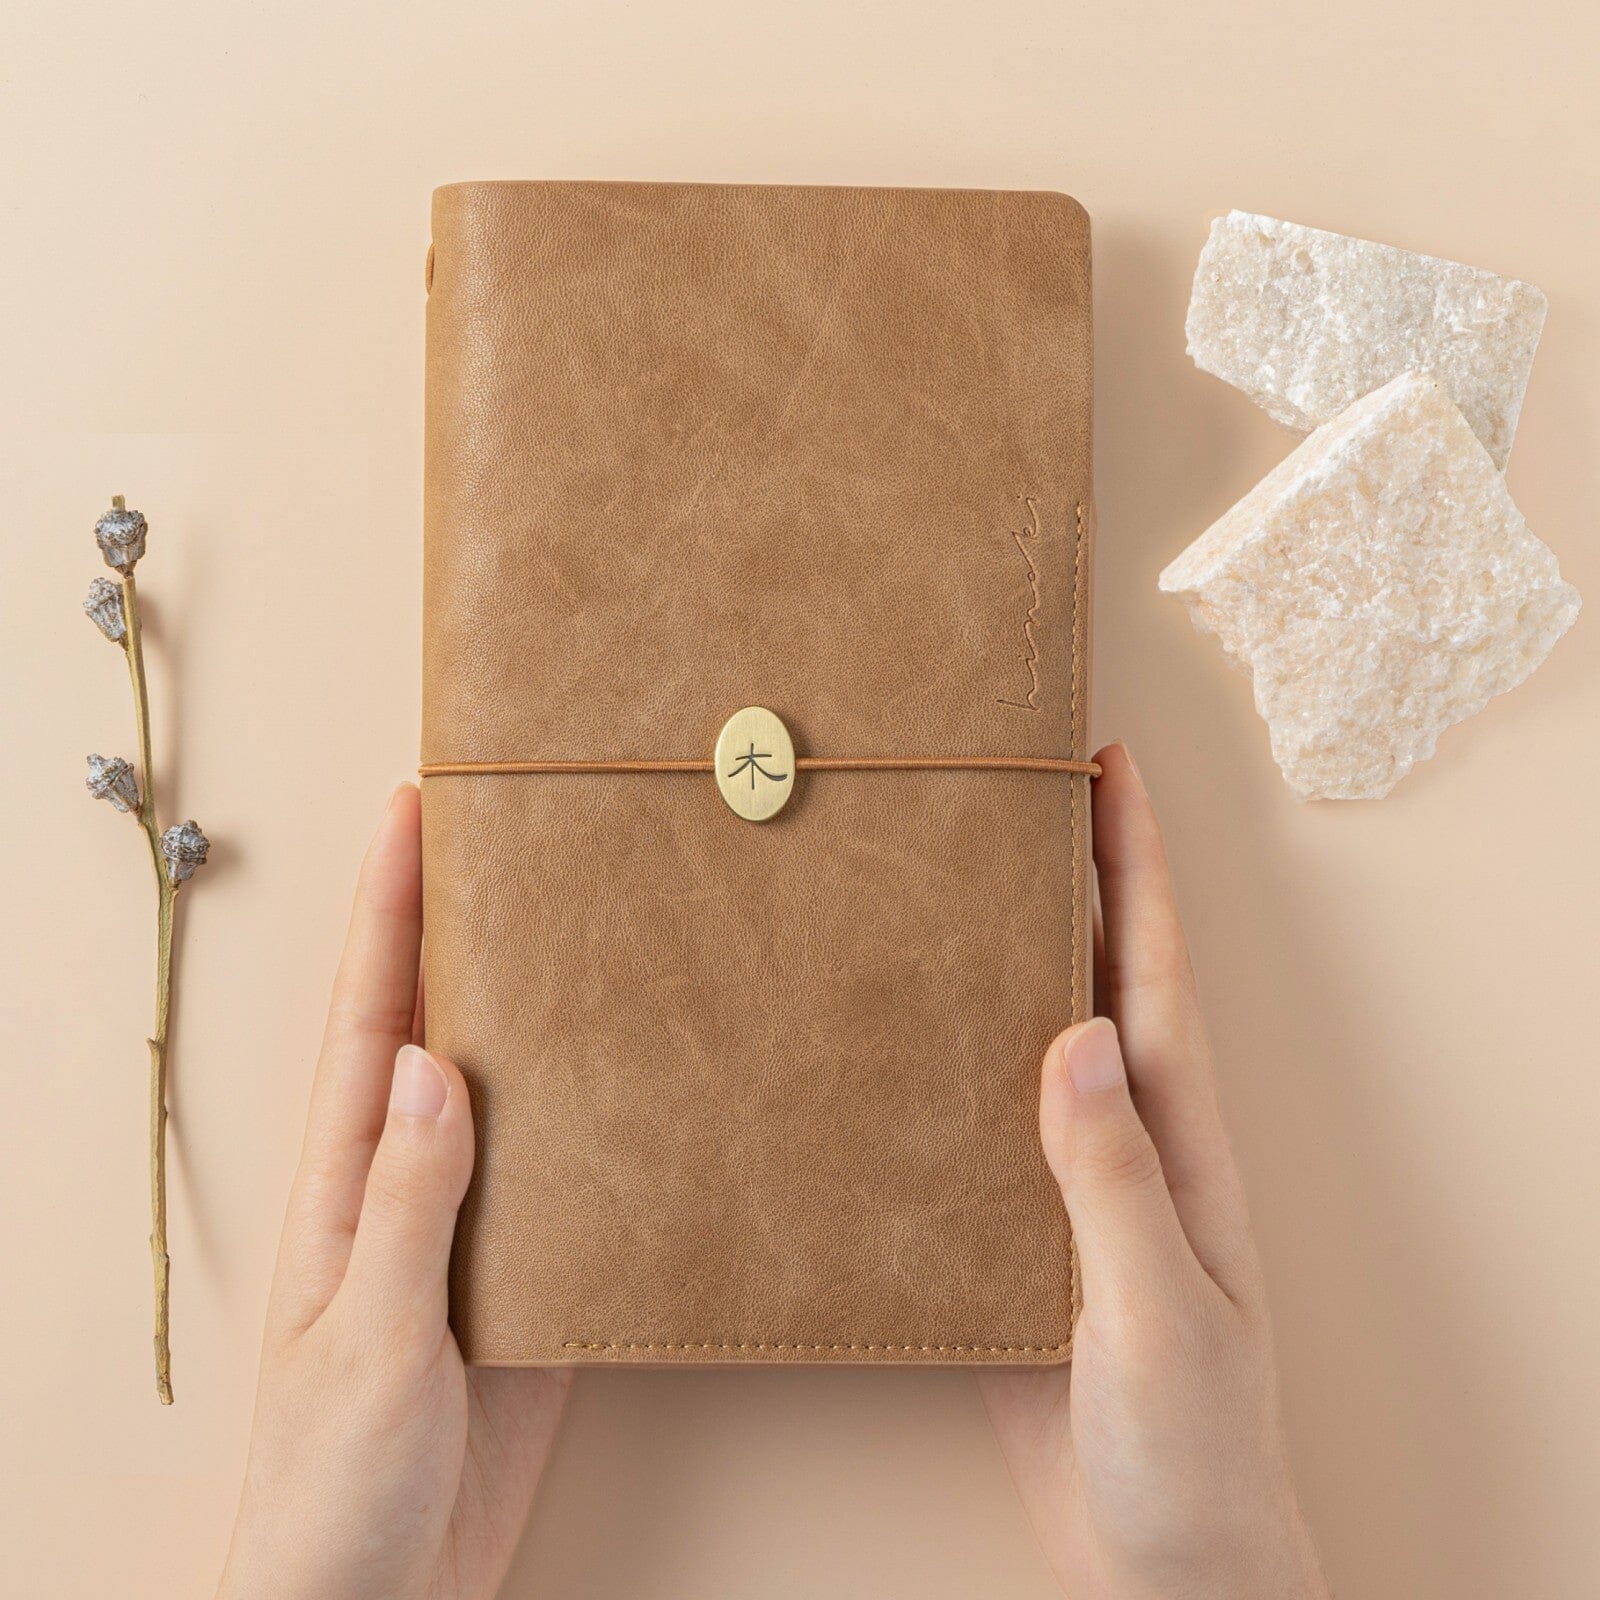 Hinoki Travel Notebook by Notebook Therapy